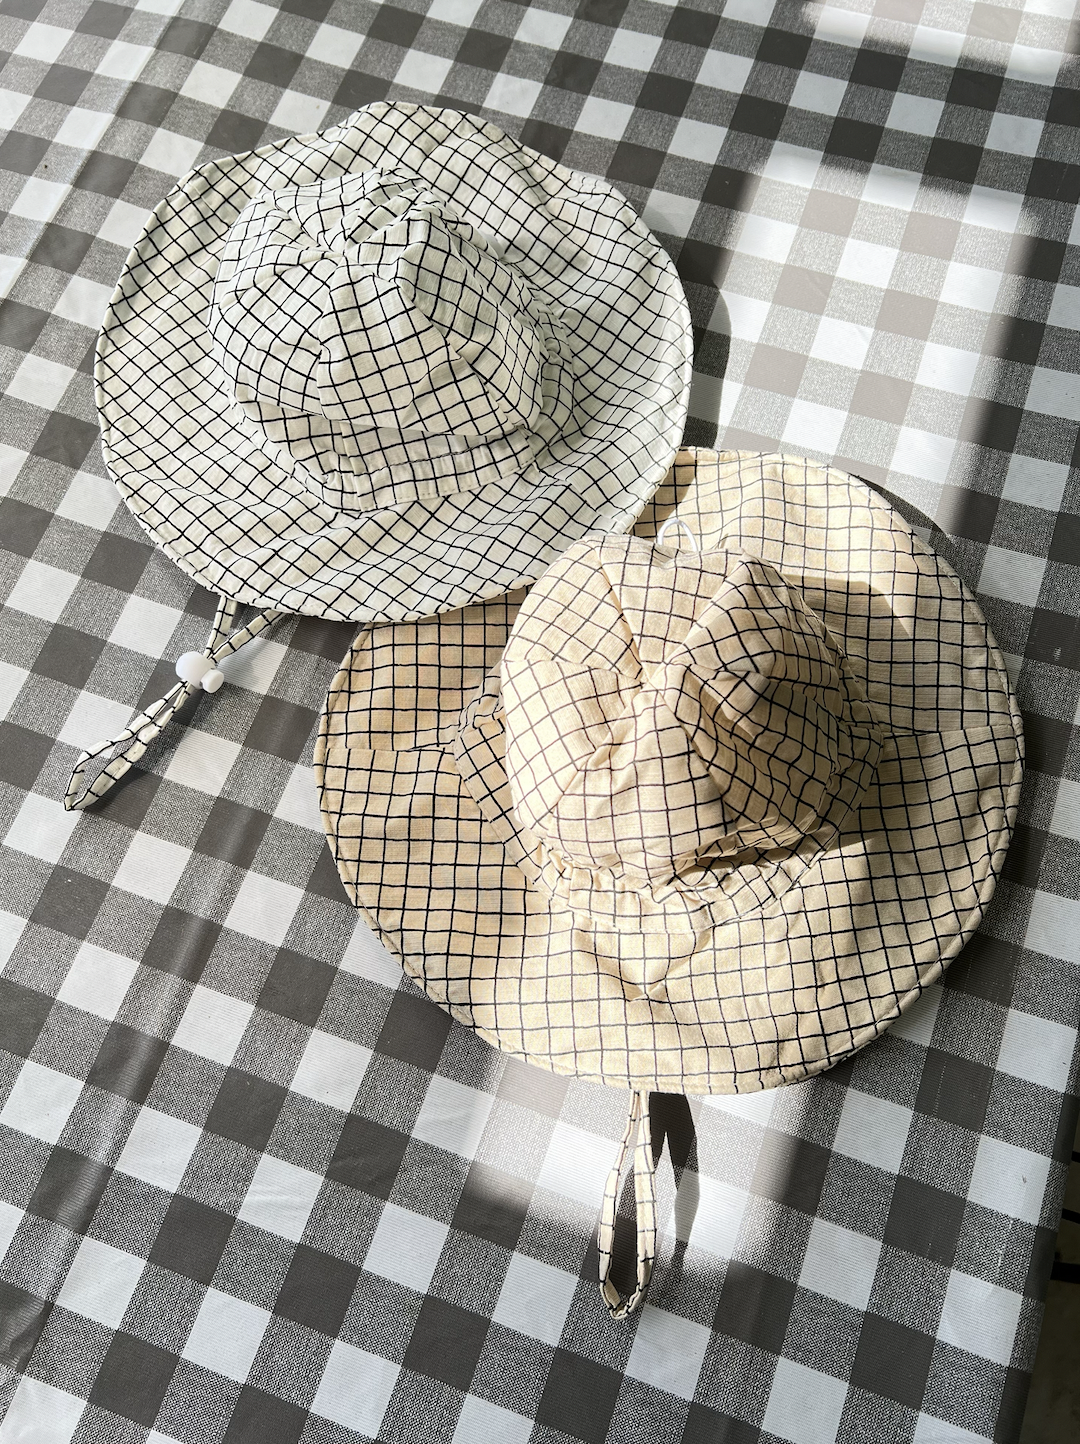 Latte | Two off the grid hats in latte and white are laid flat on a picnic check blanket